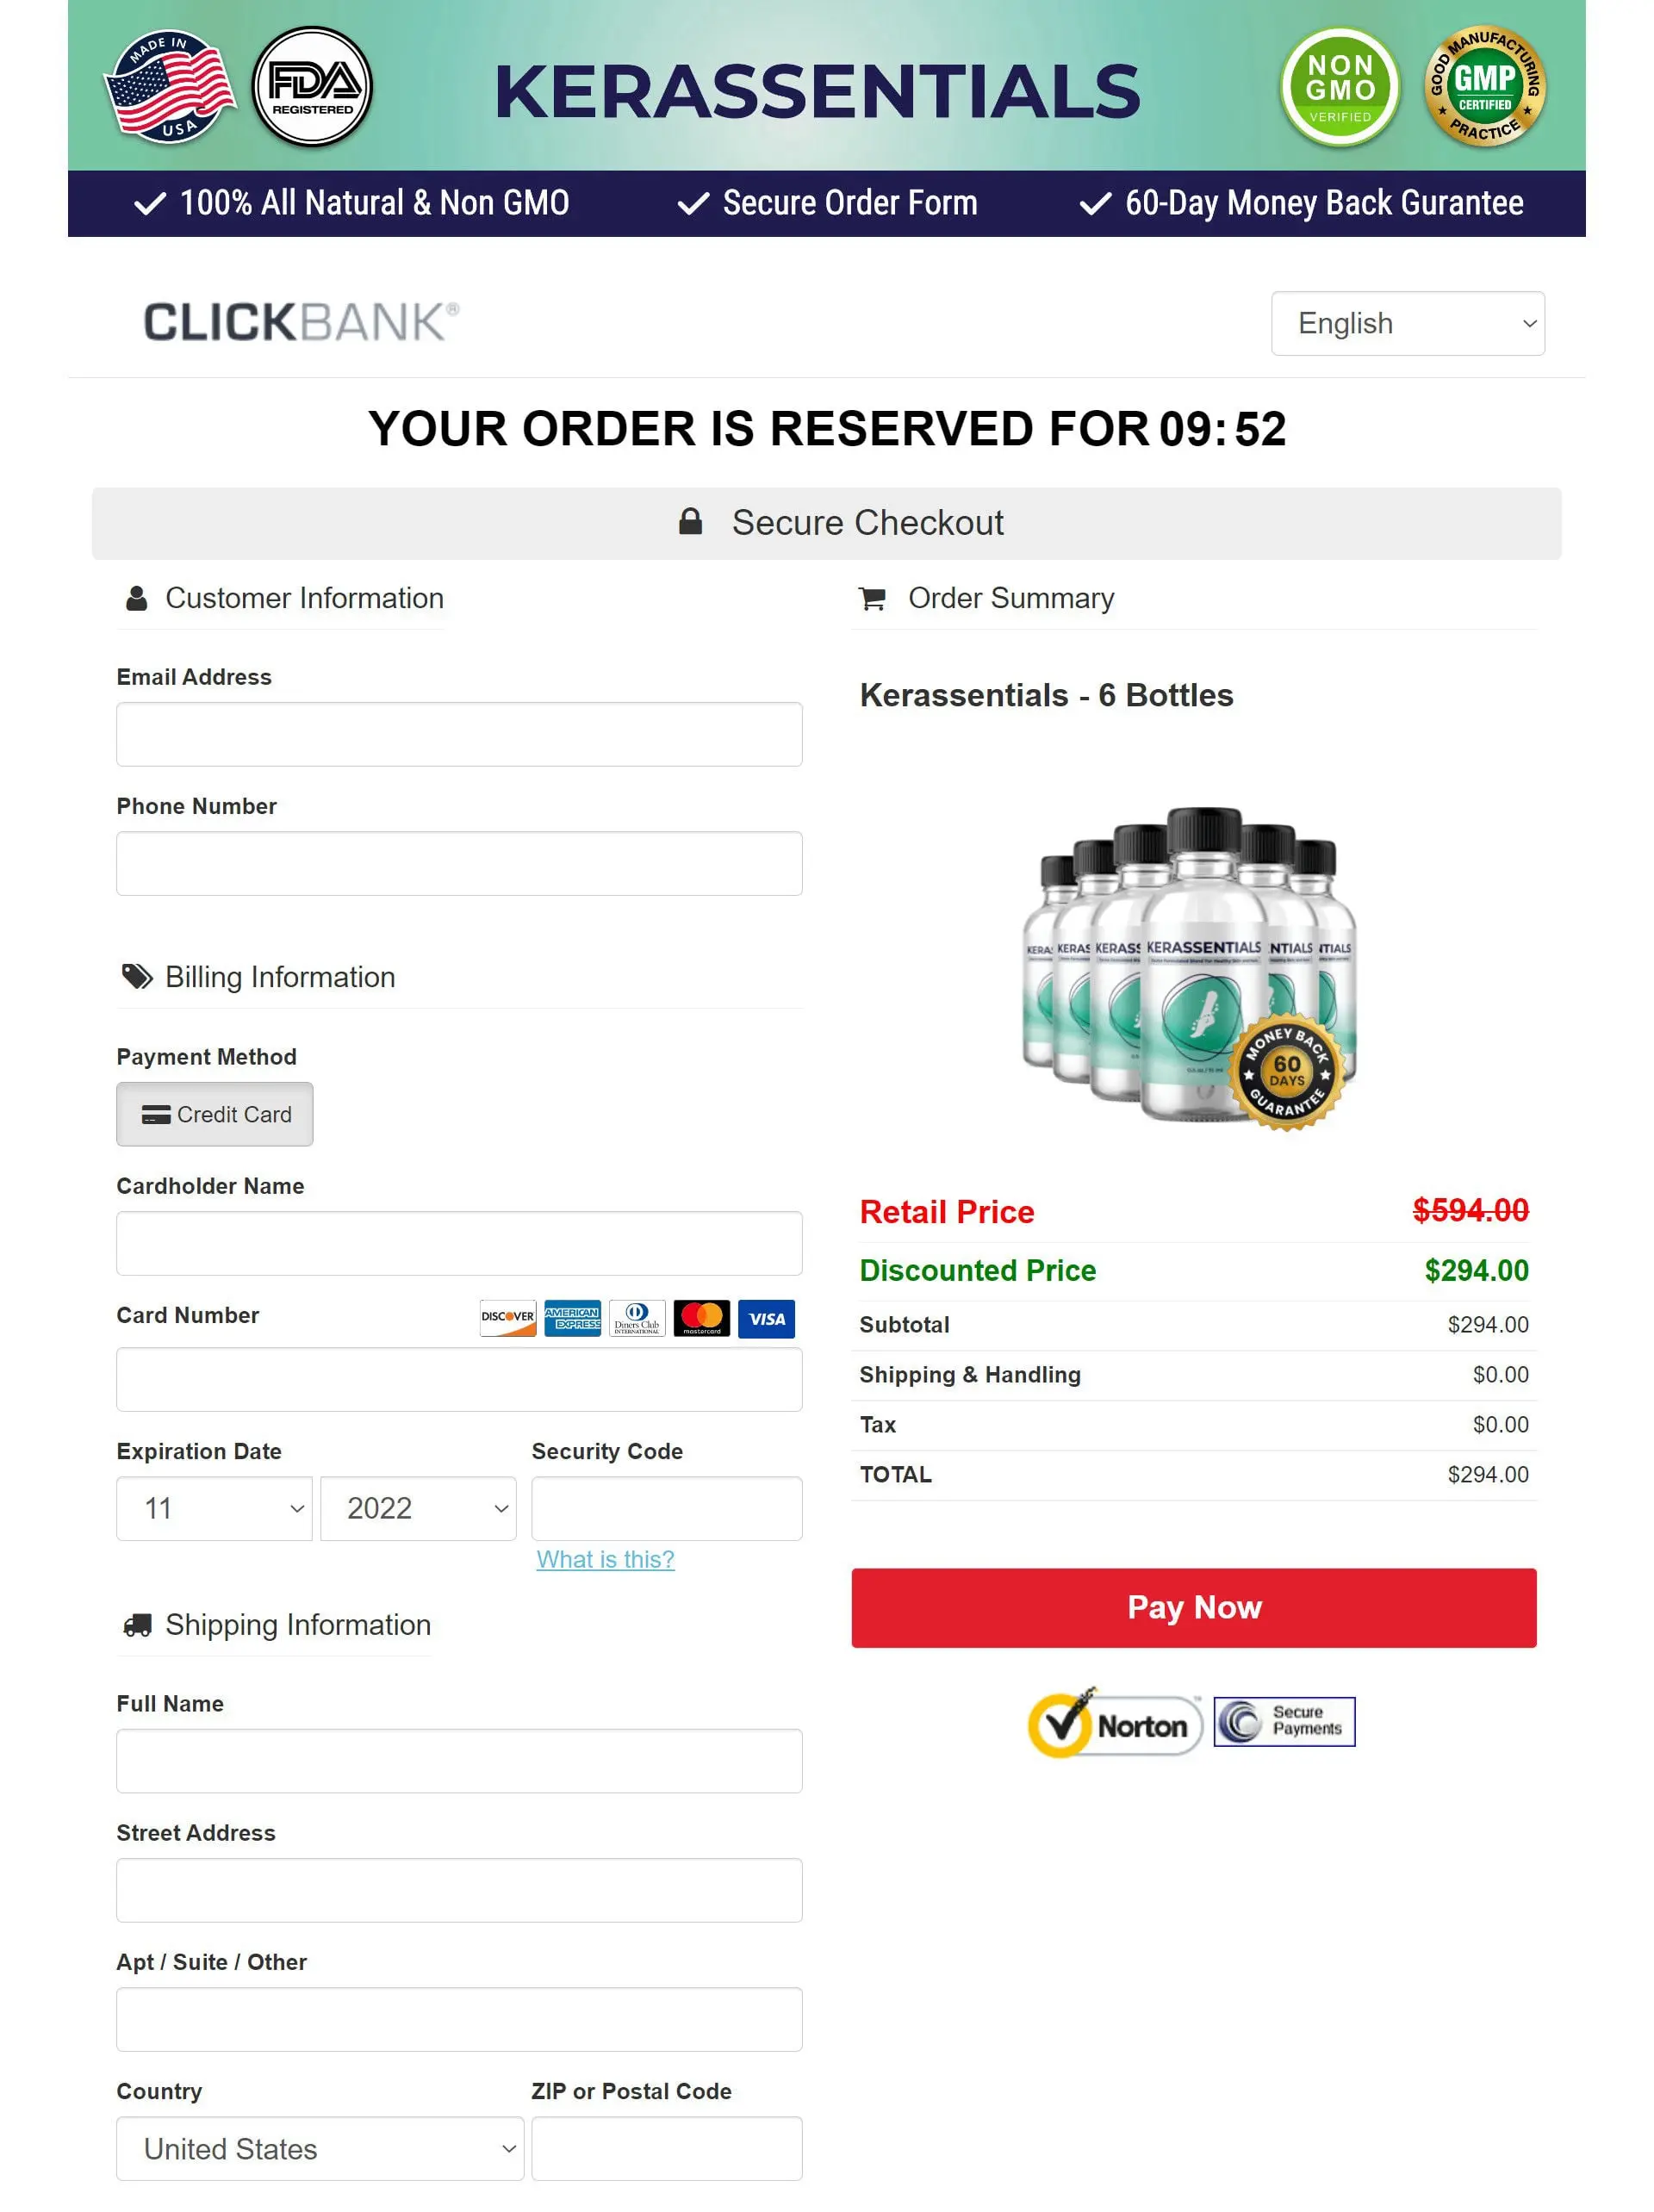 Kerassentials oil checkout page